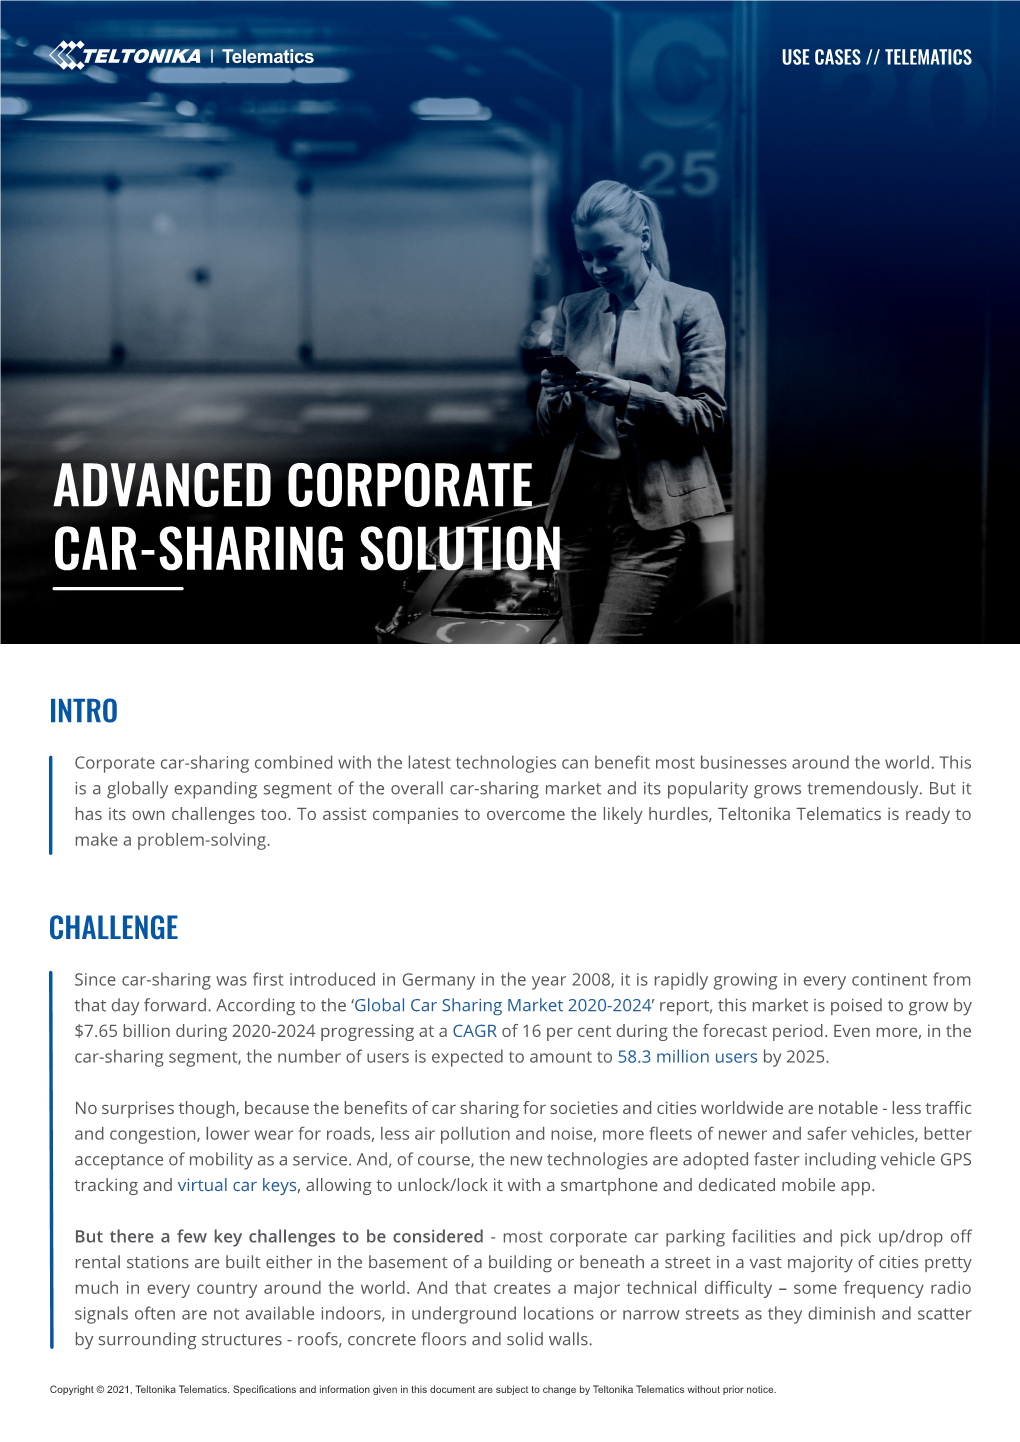 Advanced Corporate Car-Sharing Solution